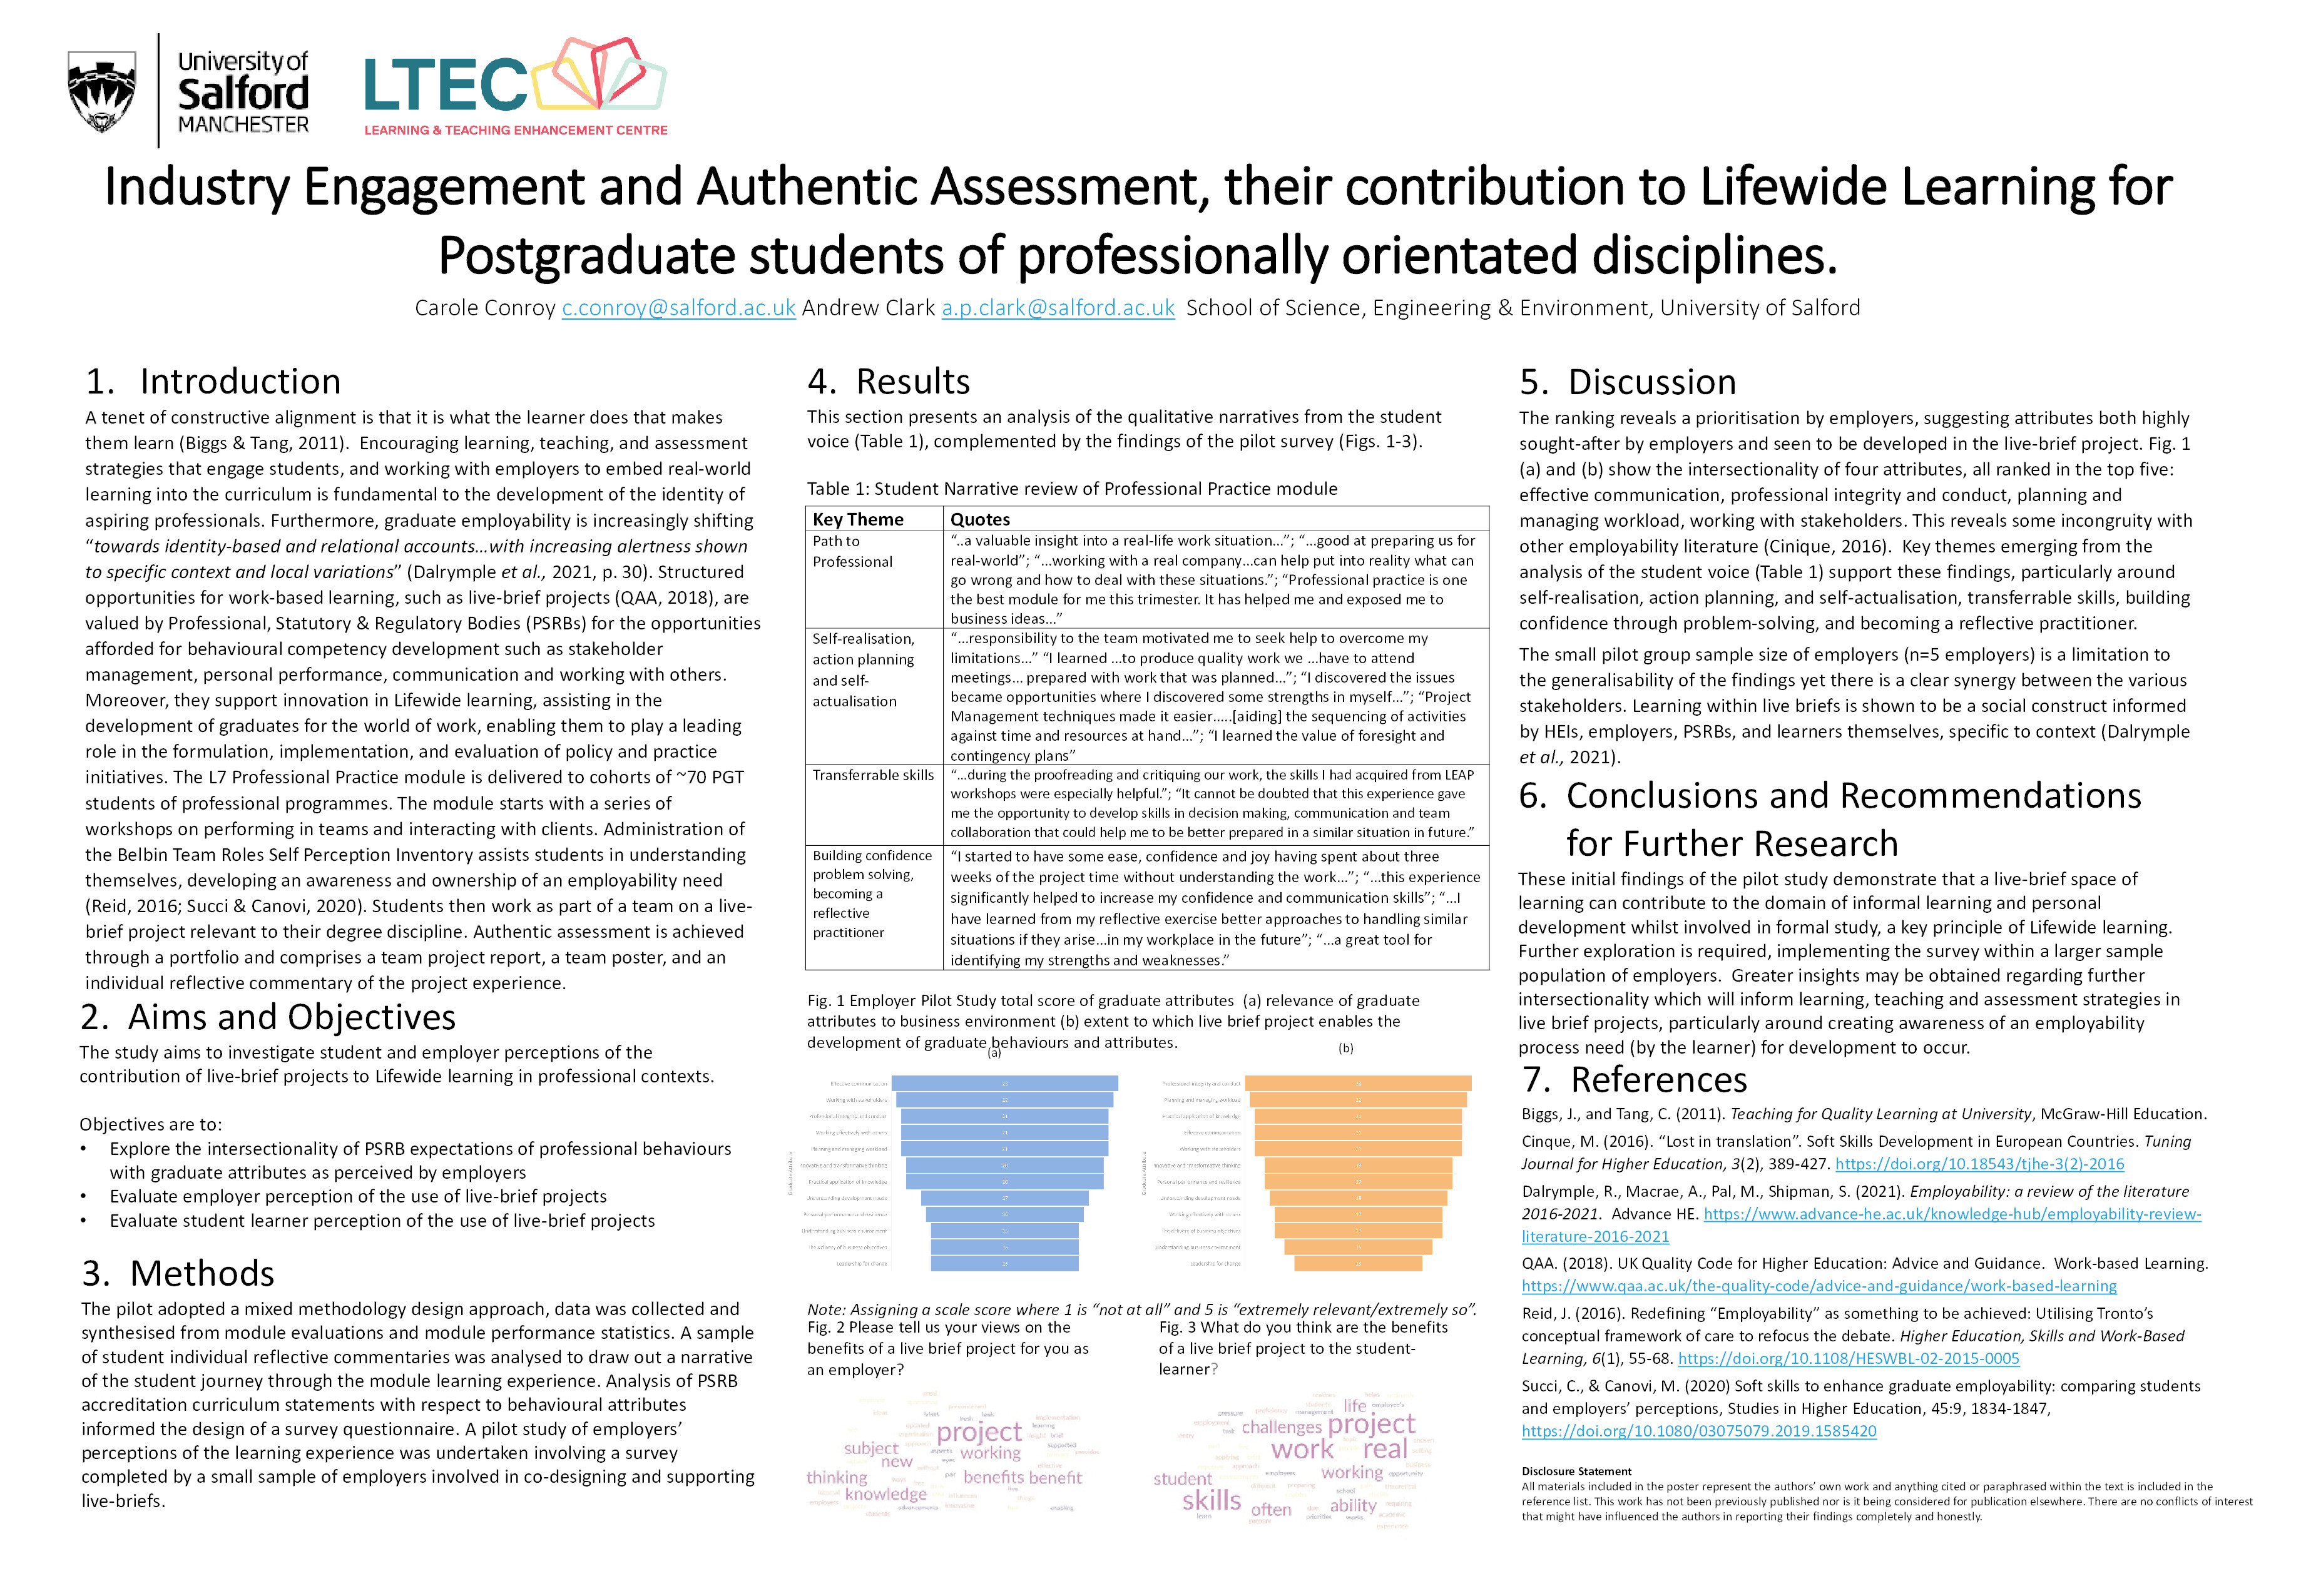 Industry Engagement and Authentic Assessment, their contribution to Lifewide Learning for Postgraduate students of professionally orientated disciplines. Thumbnail